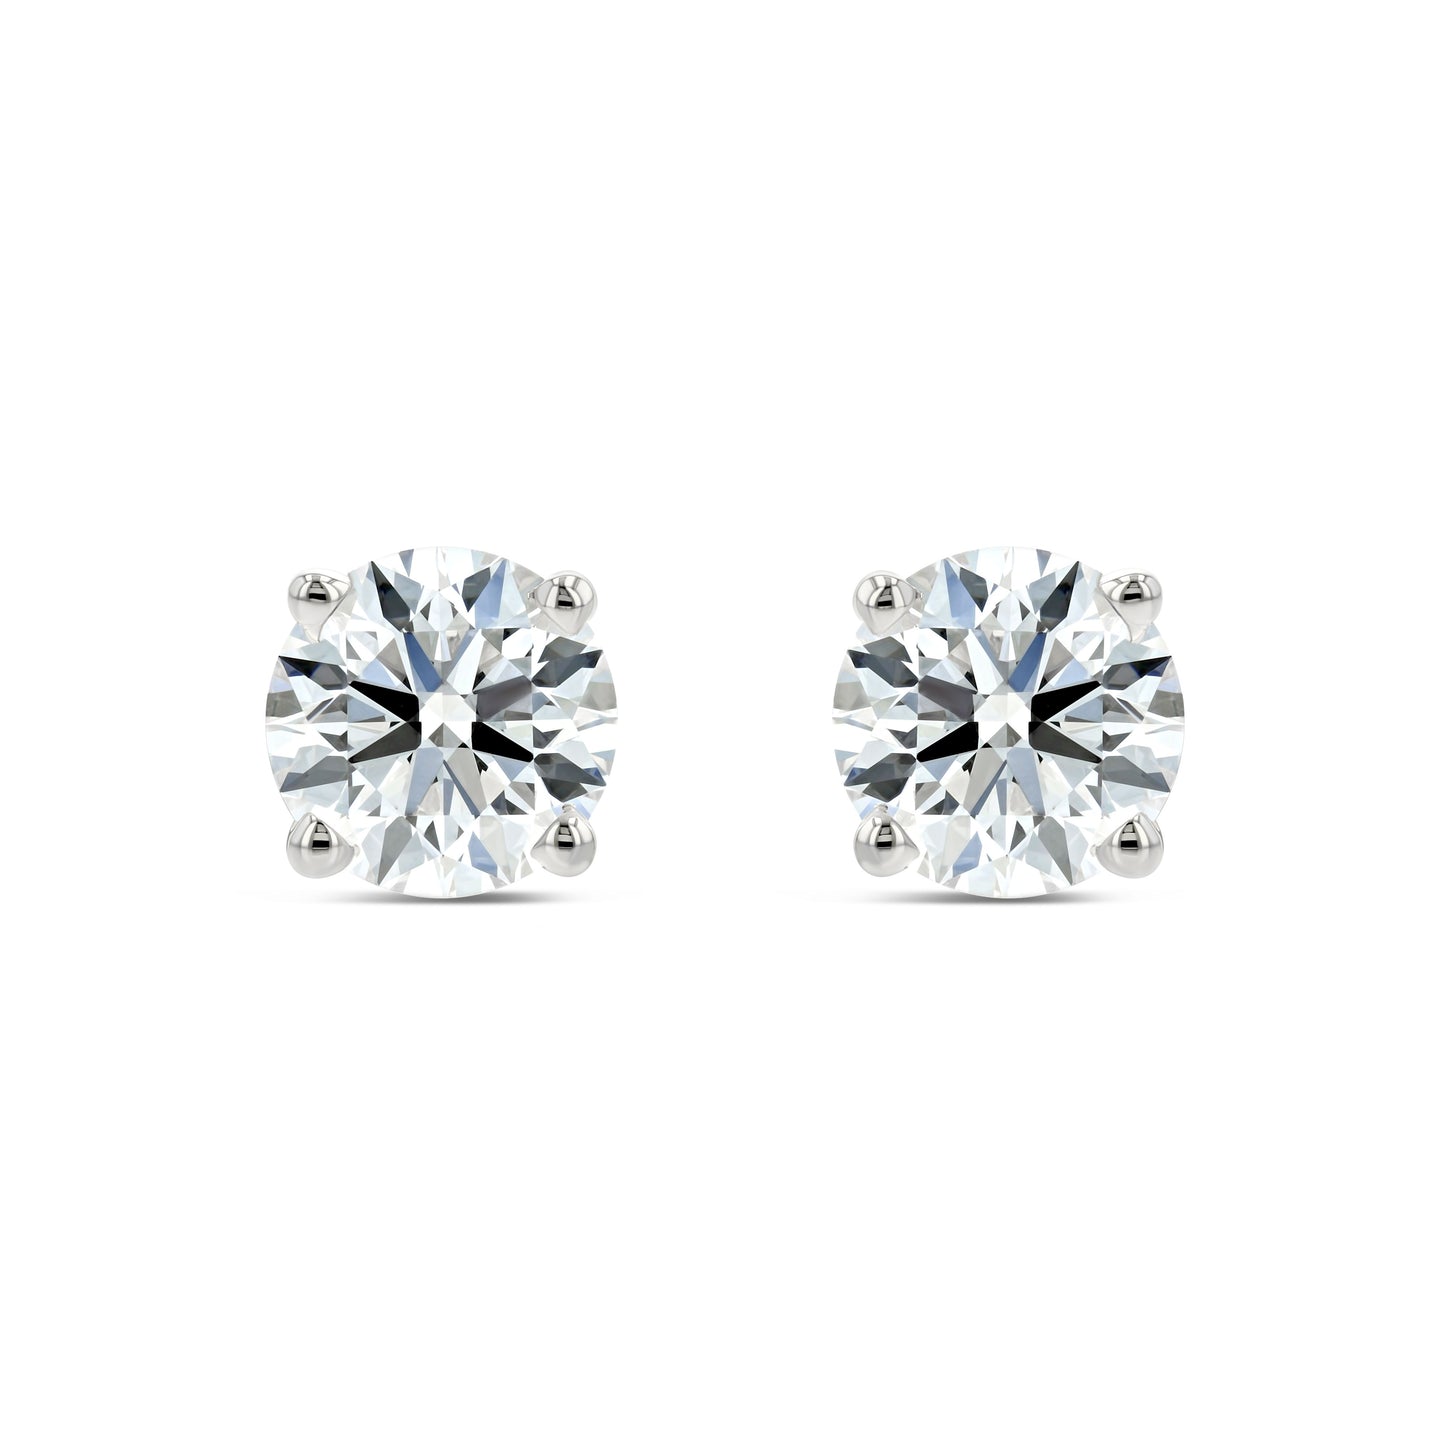 14k White Gold 4-prong Round Diamond Stud Earrings 1/2ctw (4.0mm Ea), M-n Color, Si2-si3 Clarity